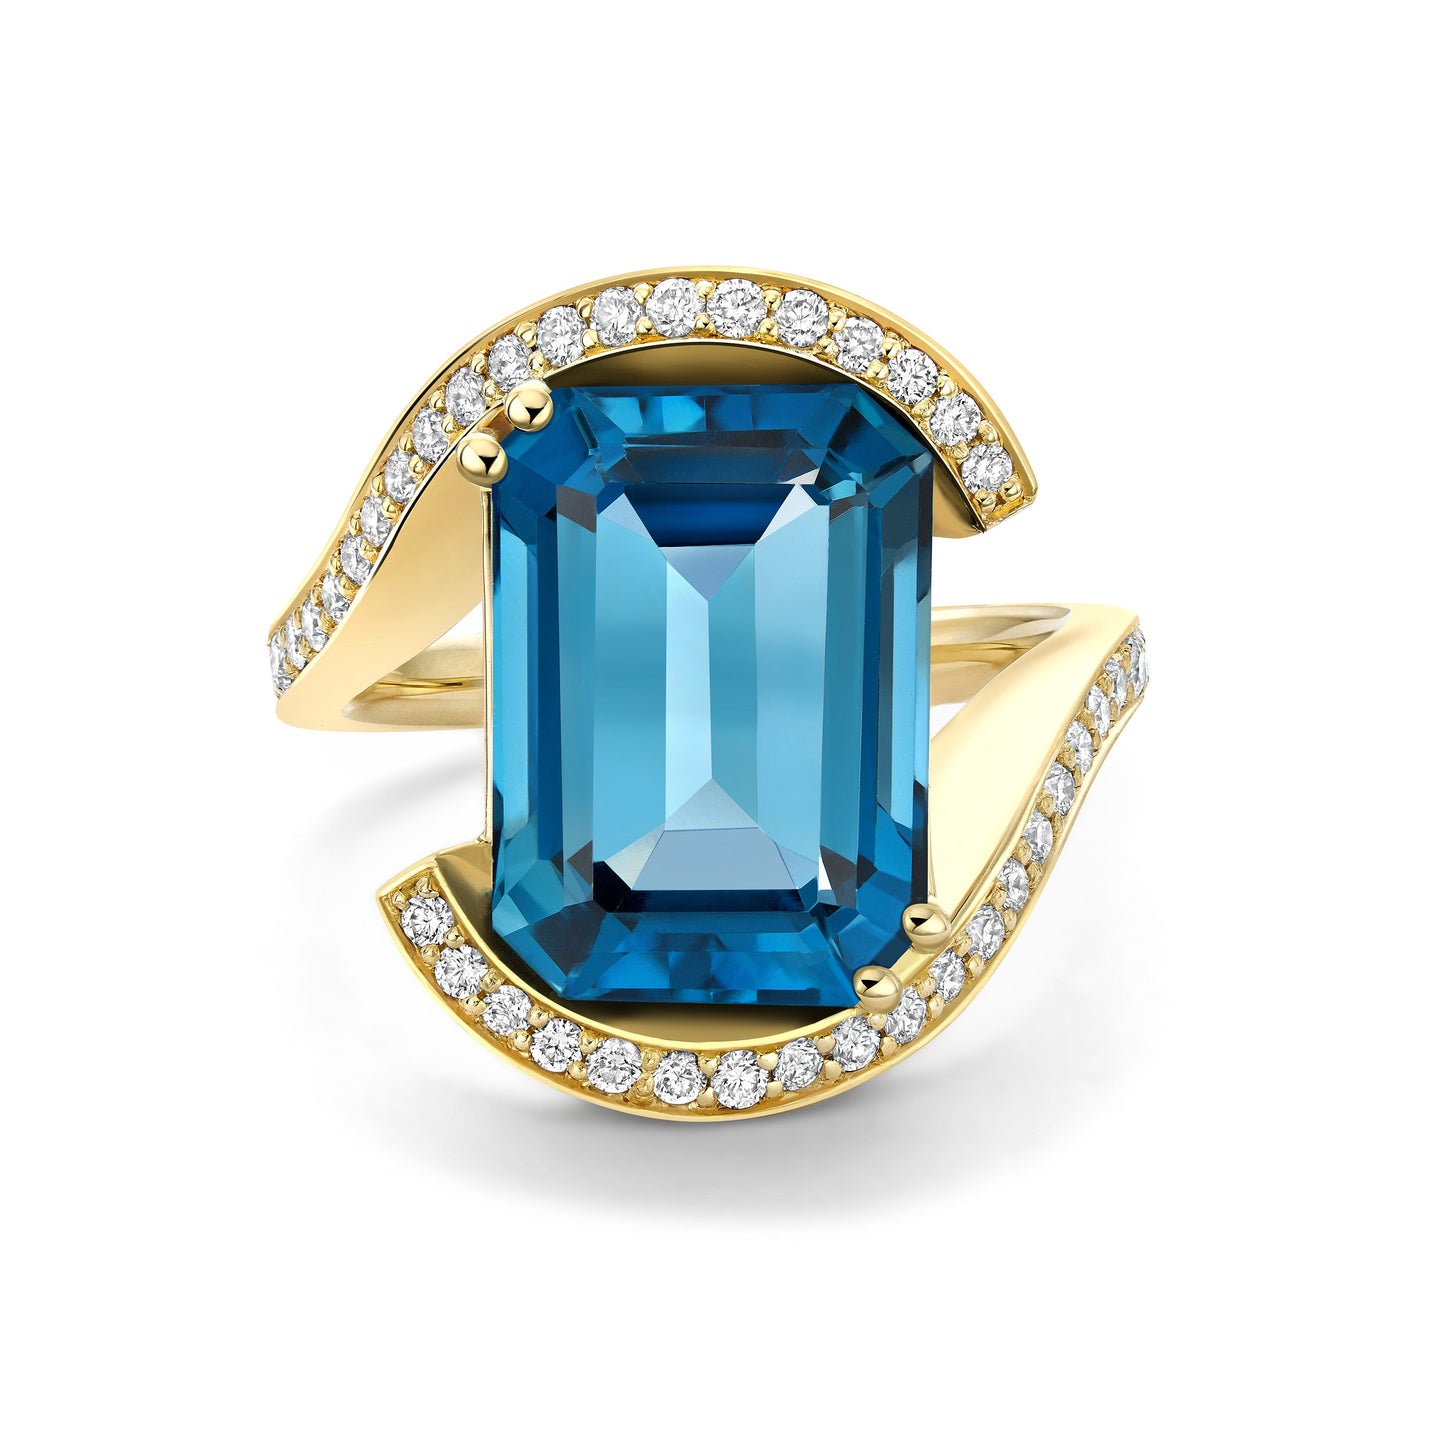 British Luxury gemstone jewellery - Diamond Ring with Teal Topaz in Wedeln Design in 18ct Yellow Gold – Gstaad Collection, Augustine Jewellery, Luxury Jewellery London.